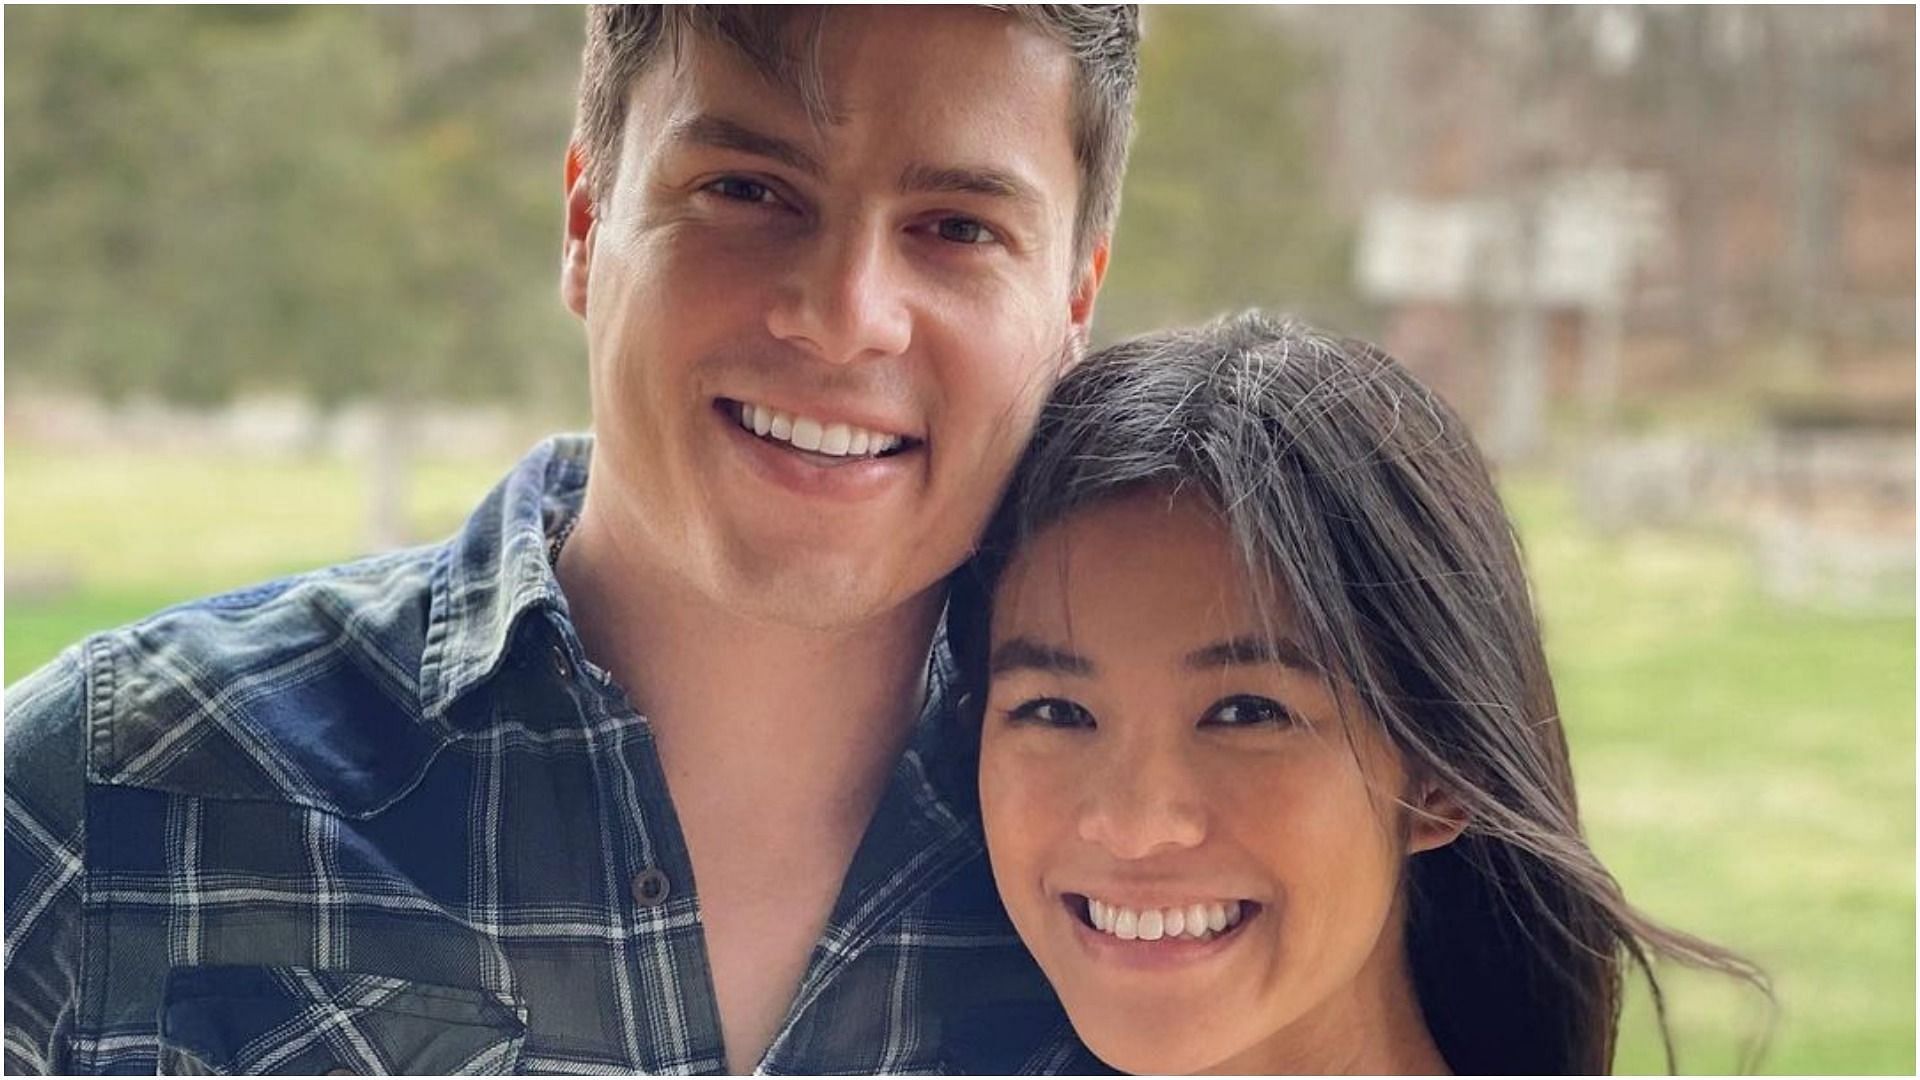 Lawson Bates and Tiffany Espensen started dating in February 2021 (Image via lawbates/Instagram)